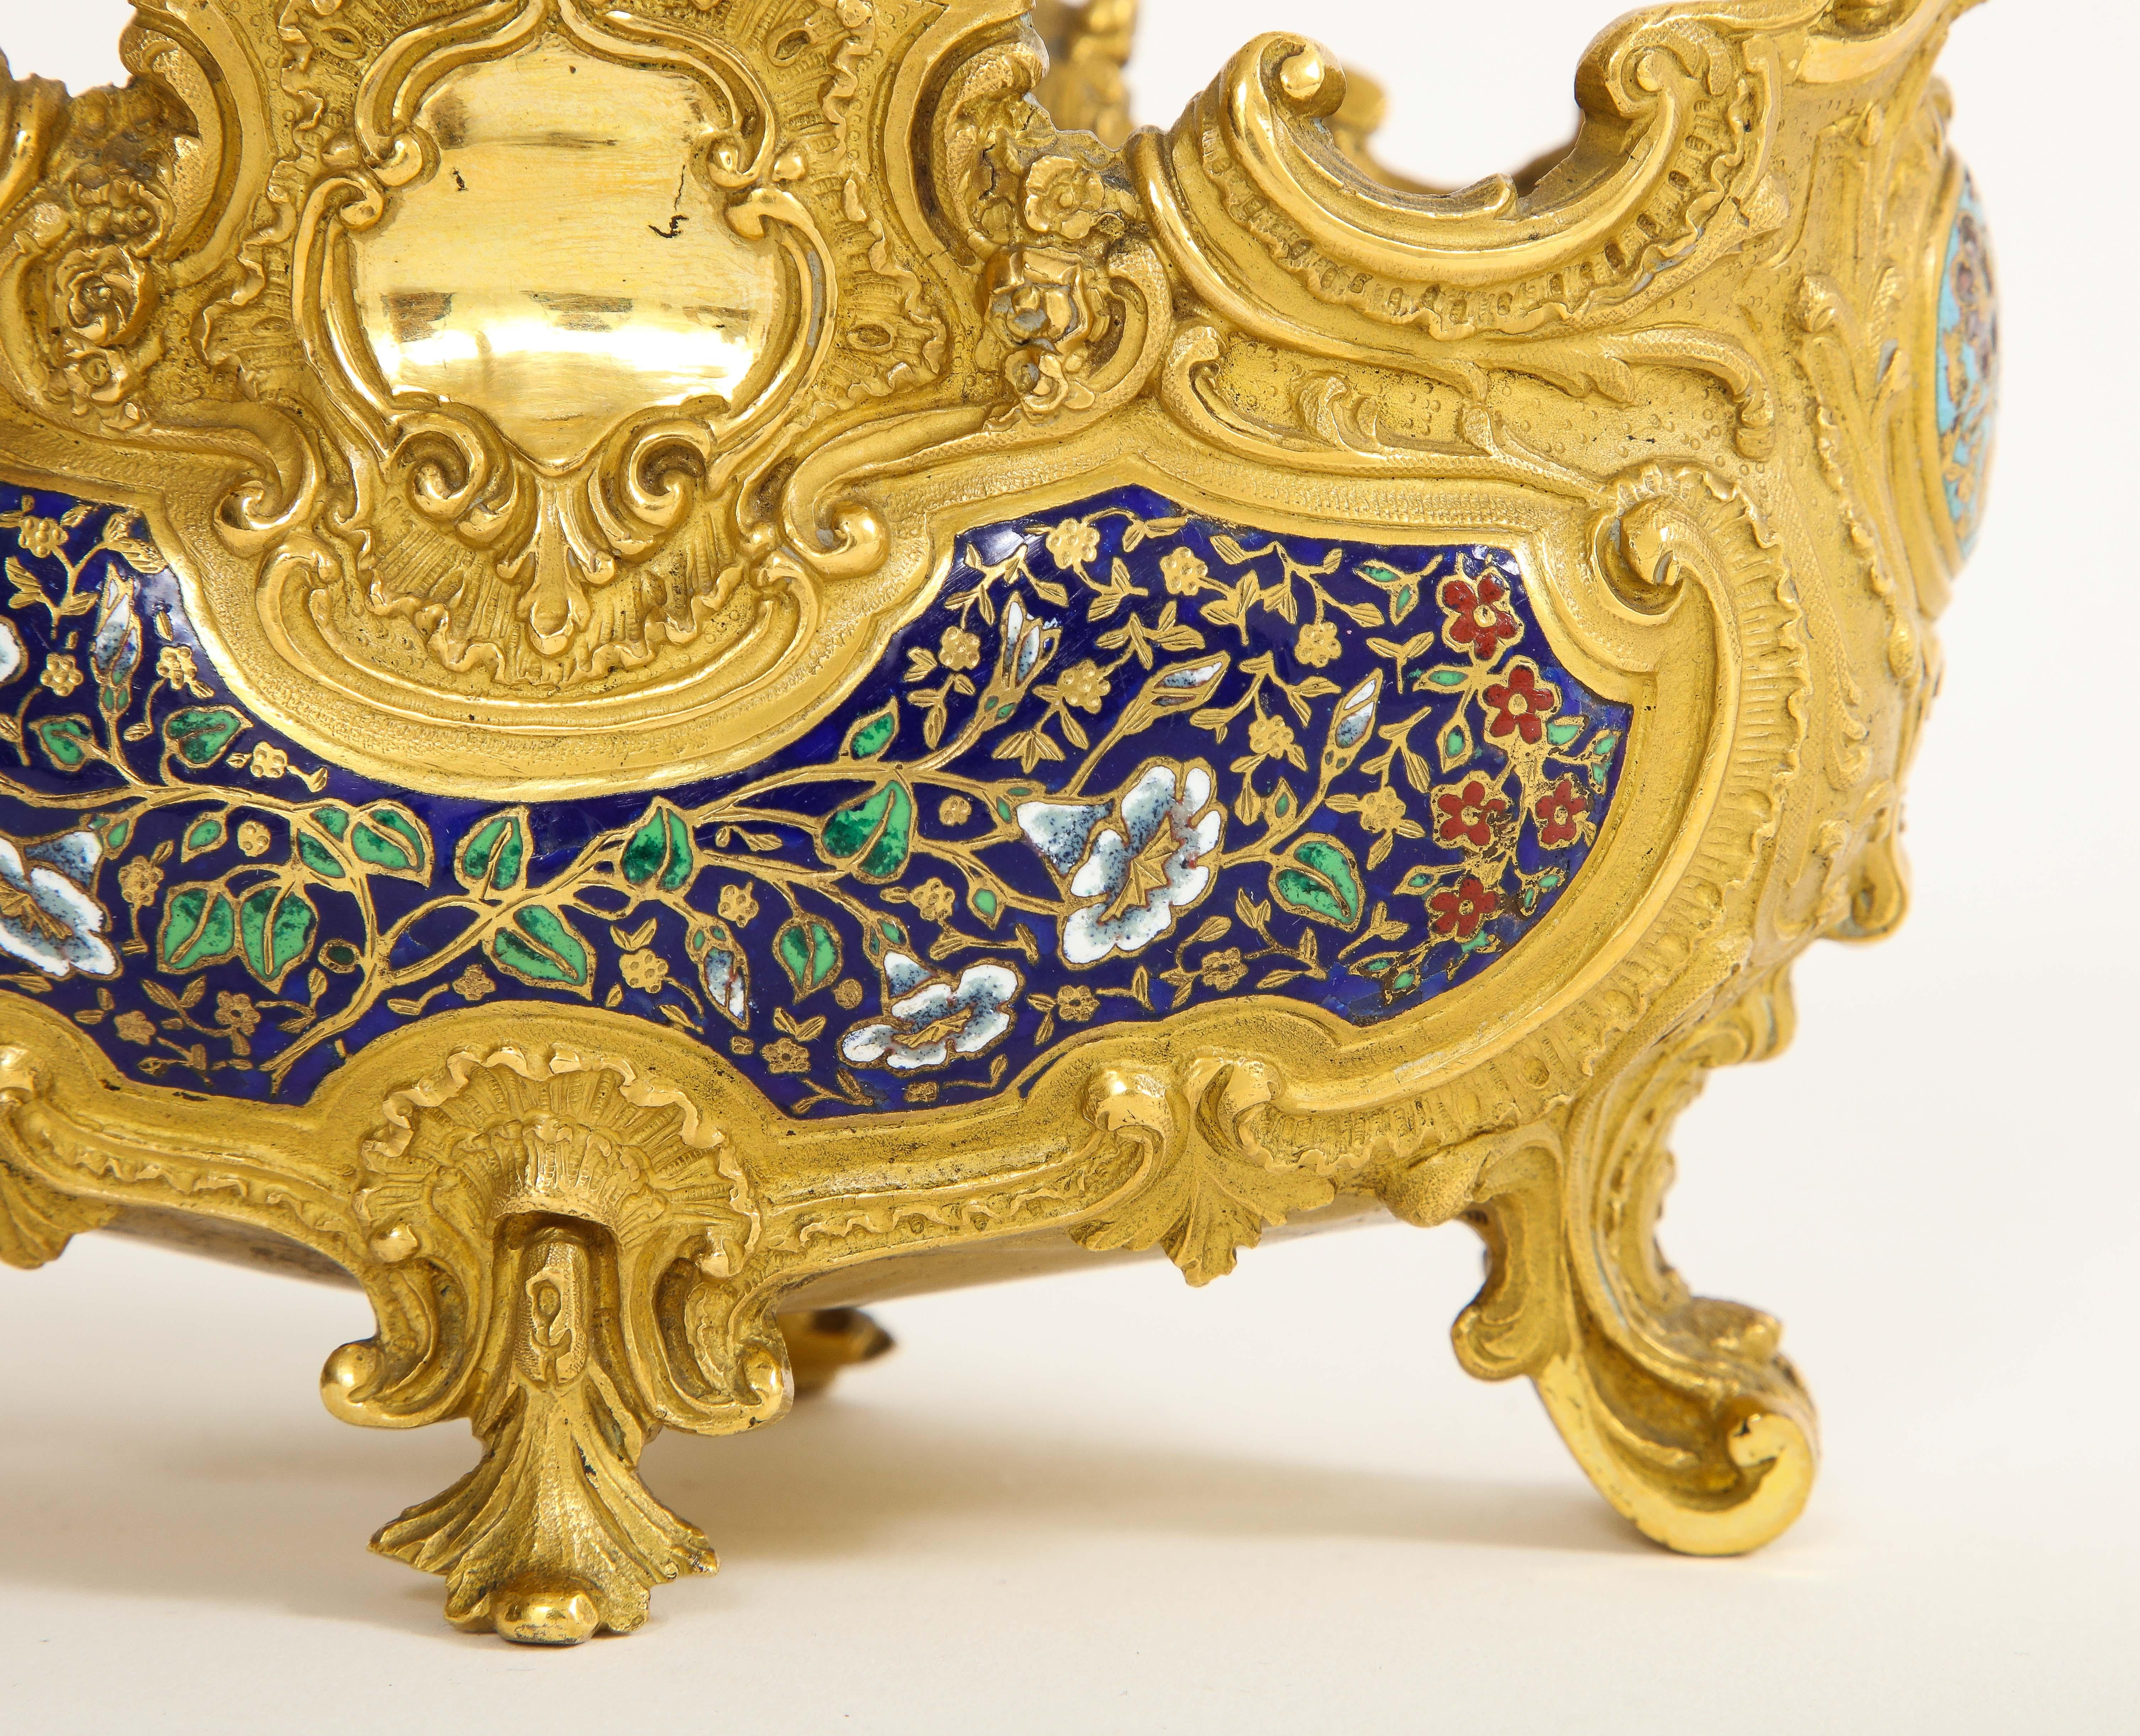 A 19th C. French Ormolu Champlevé Enamel Footed Centerpiece, Att. Barbedienne For Sale 6